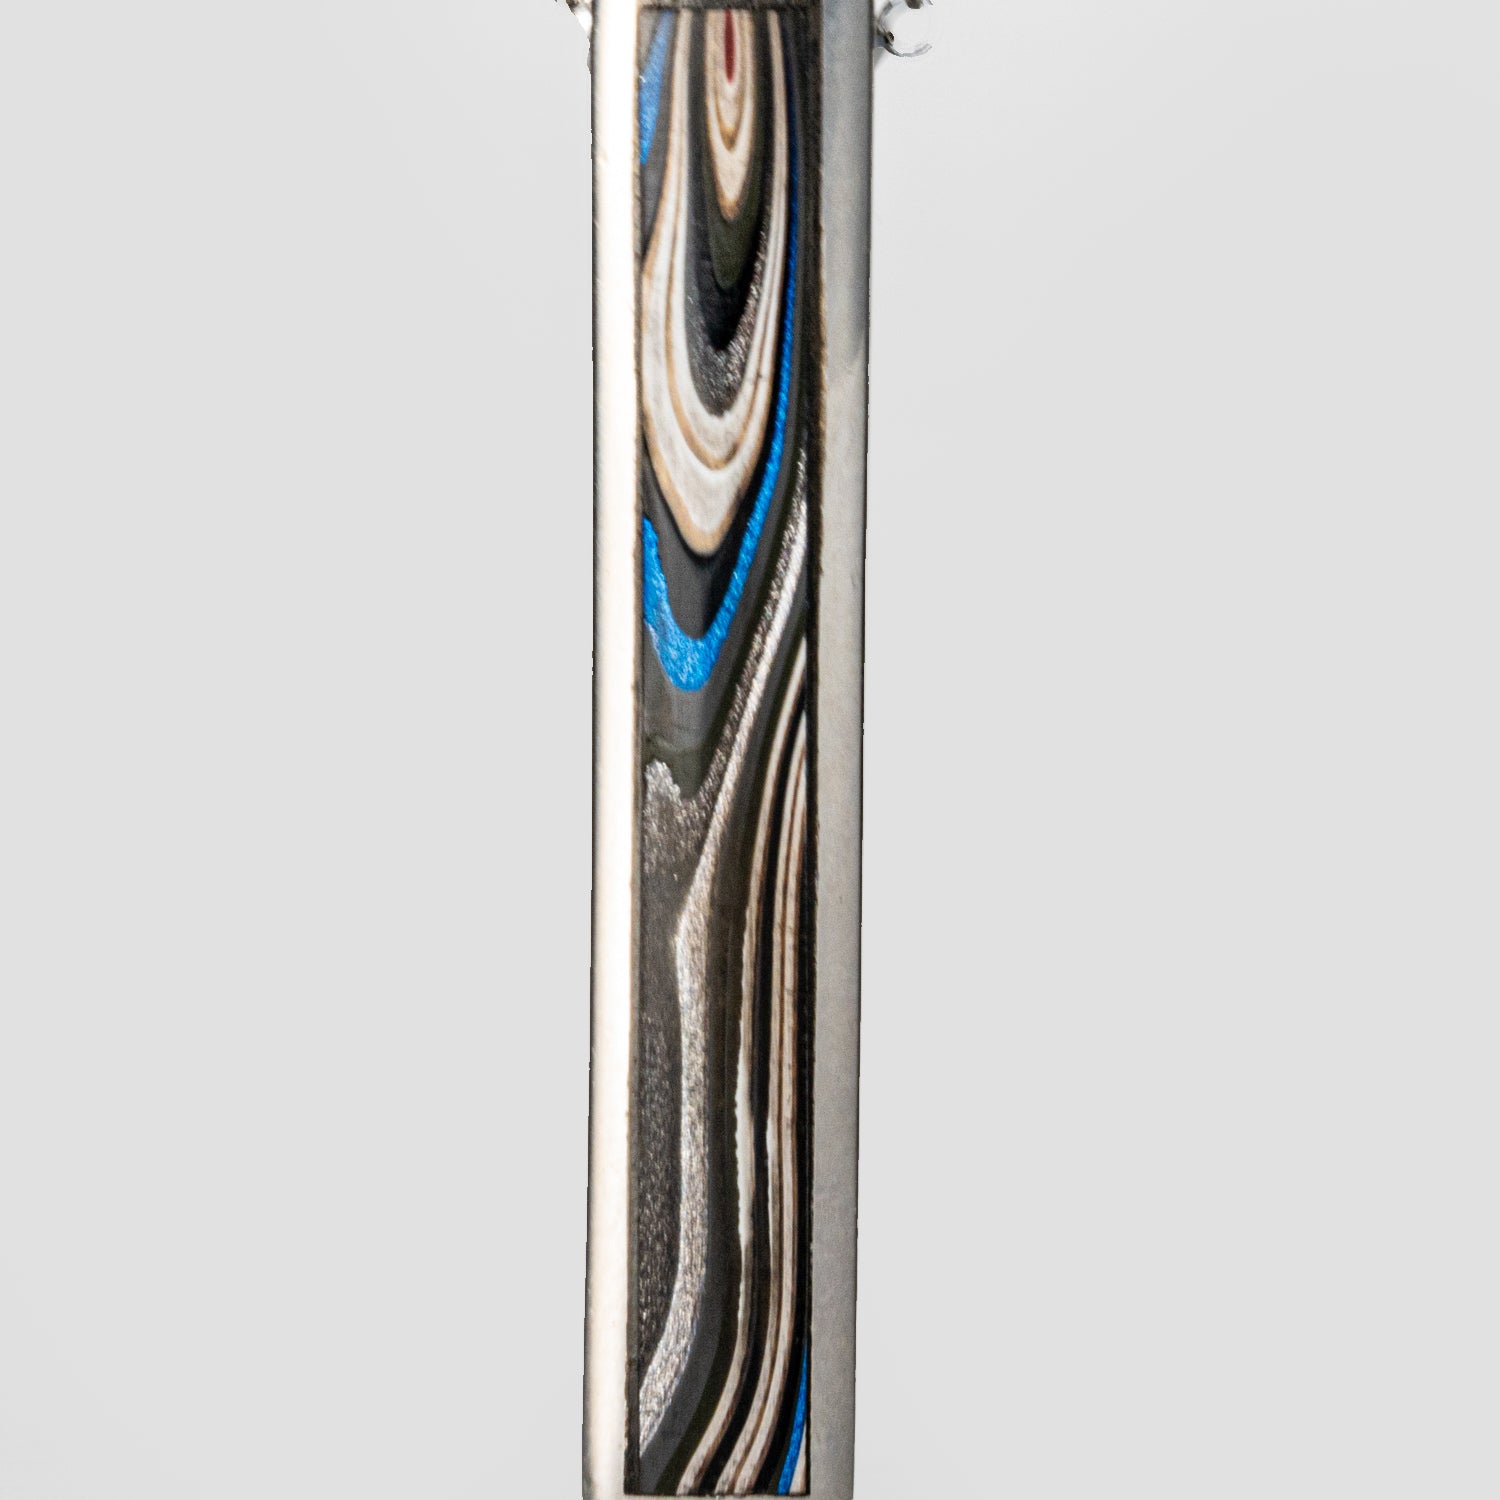 Genuine Fordite Sterling Silver Pendant with 18" Sterling Silver Necklace